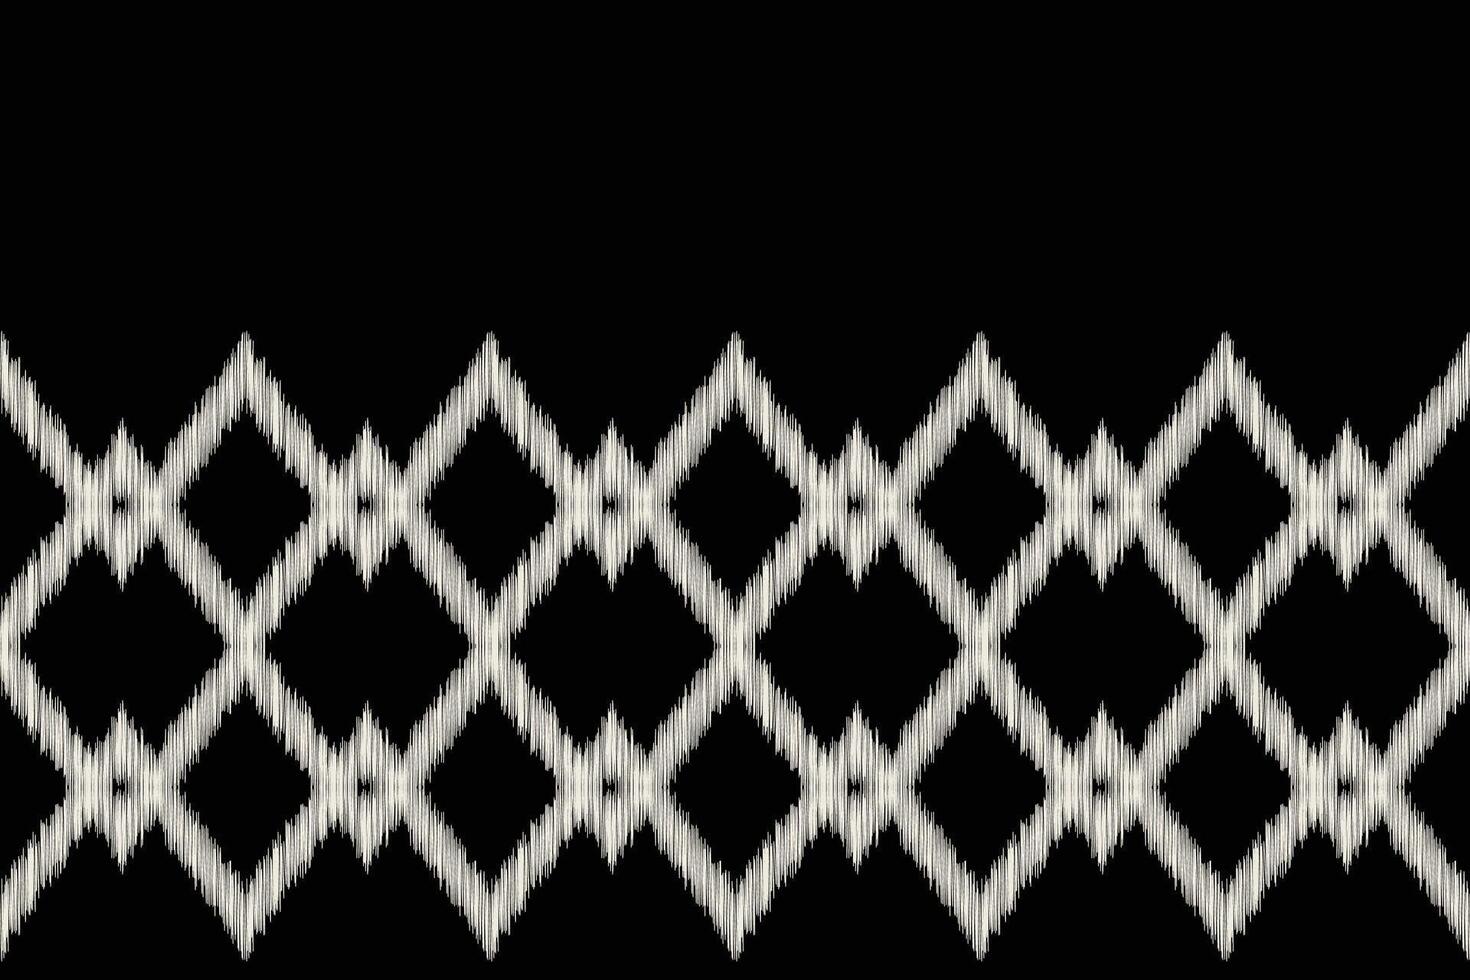 Traditional Ethnic ikat motif fabric background pattern geometric .African Ikat embroidery Ethnic oriental pattern black background wallpaper. Abstract,,illustration.Texture,frame,decoration. vector